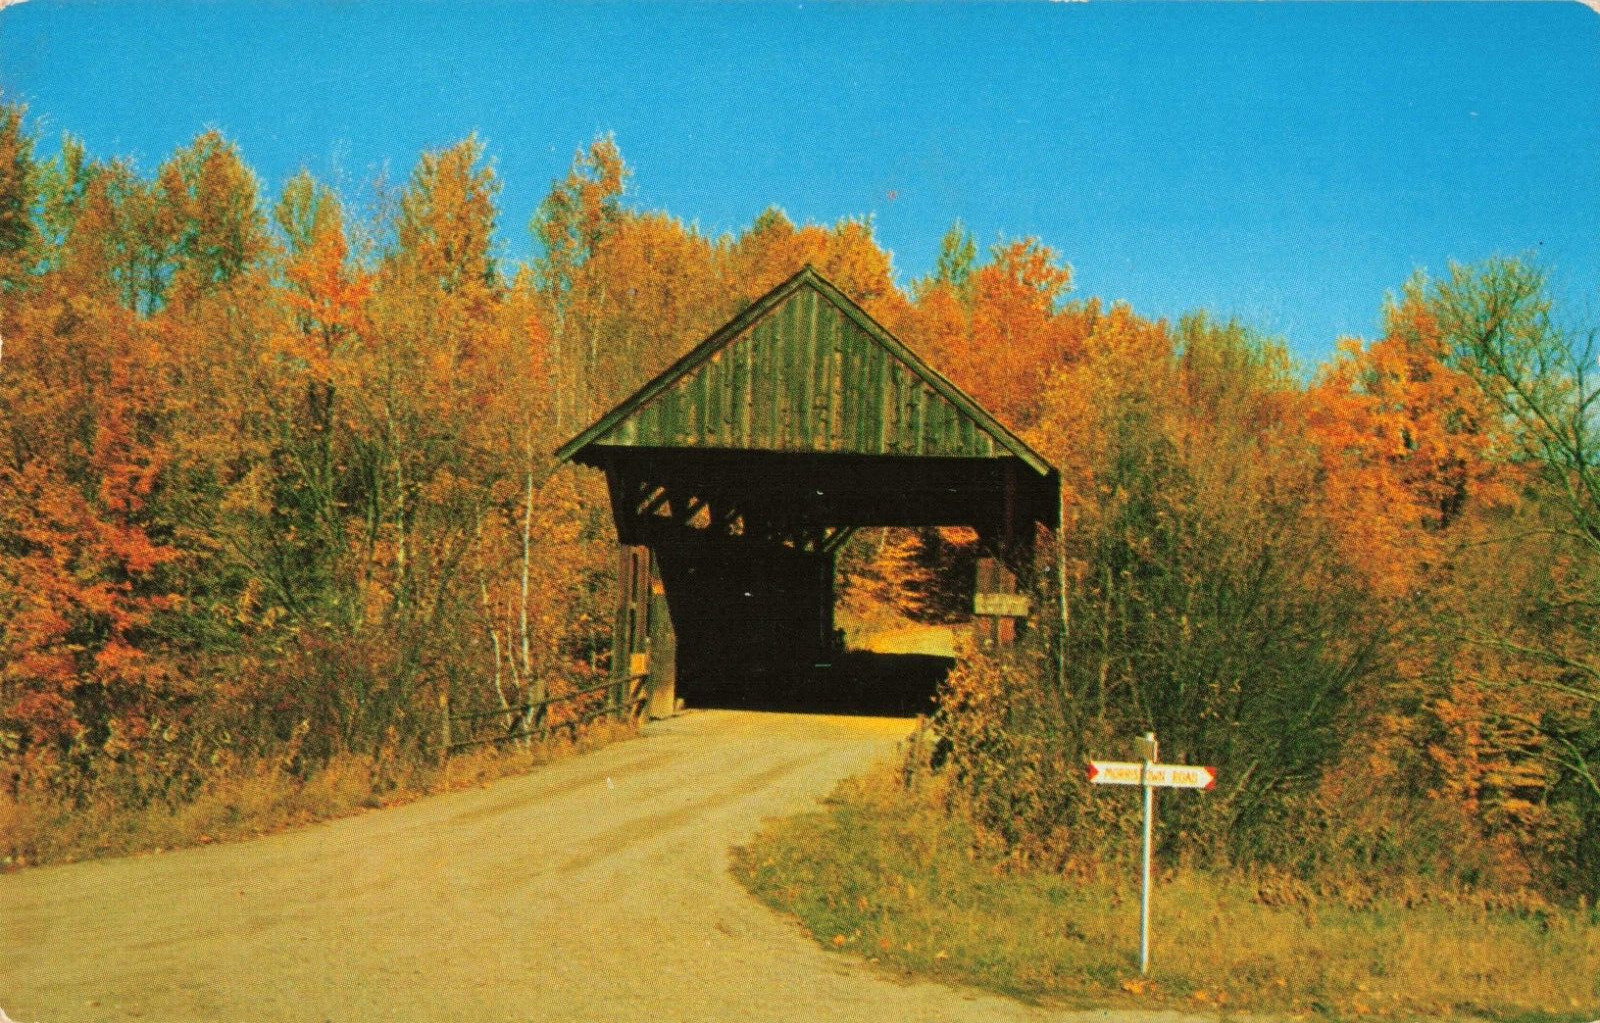 Stowe VT Vermont, Old Covered Bridge, Fall Foliage, Vintage Postcard